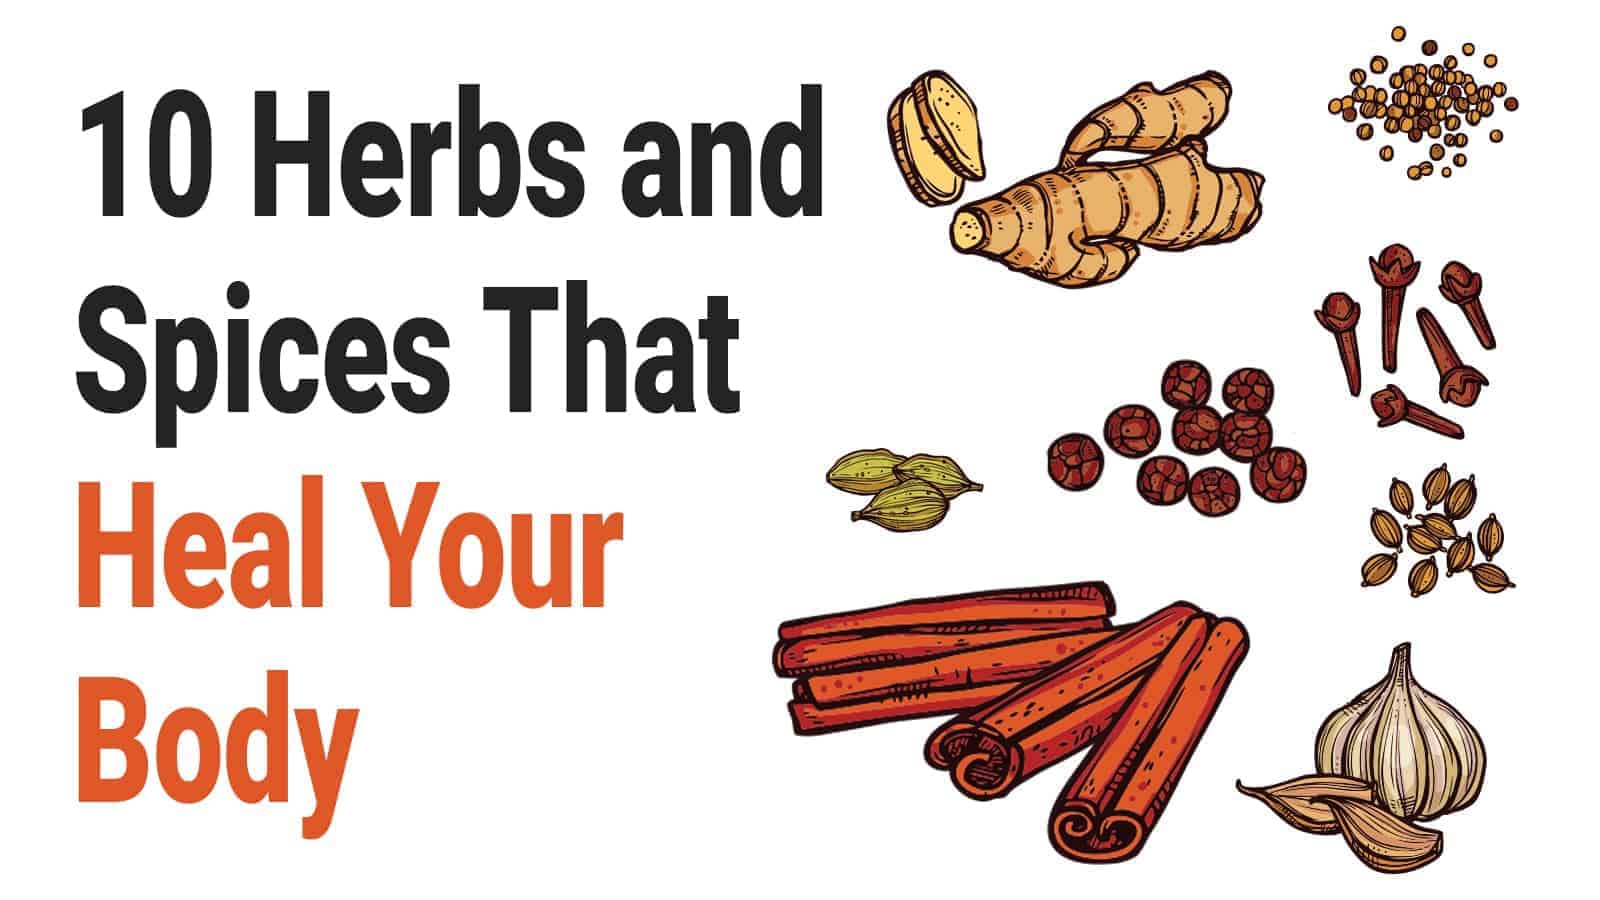 10 Herbs and Spices That Heal Your Body